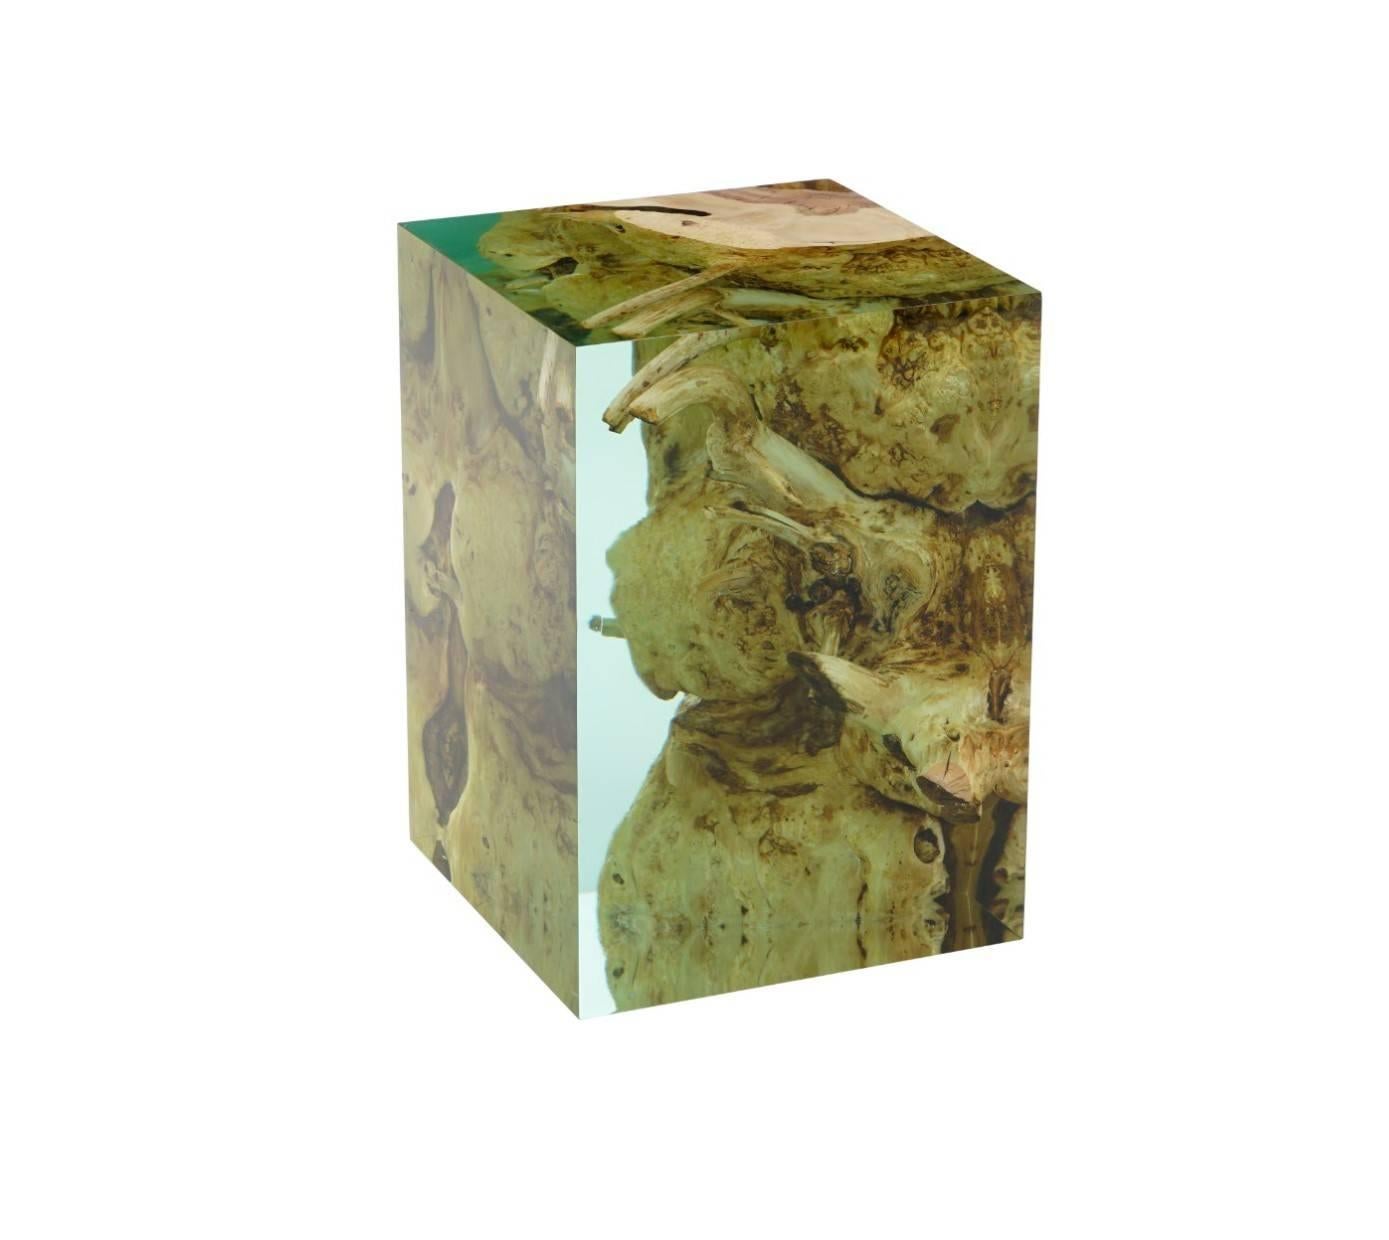 The Hudson cube is by far the best conversation piece you can add to your home, office or entertaining space. Its tranquil feel combined with a contemporary style is comfortably thought provoking. Each cube is one of a kind and carries its own